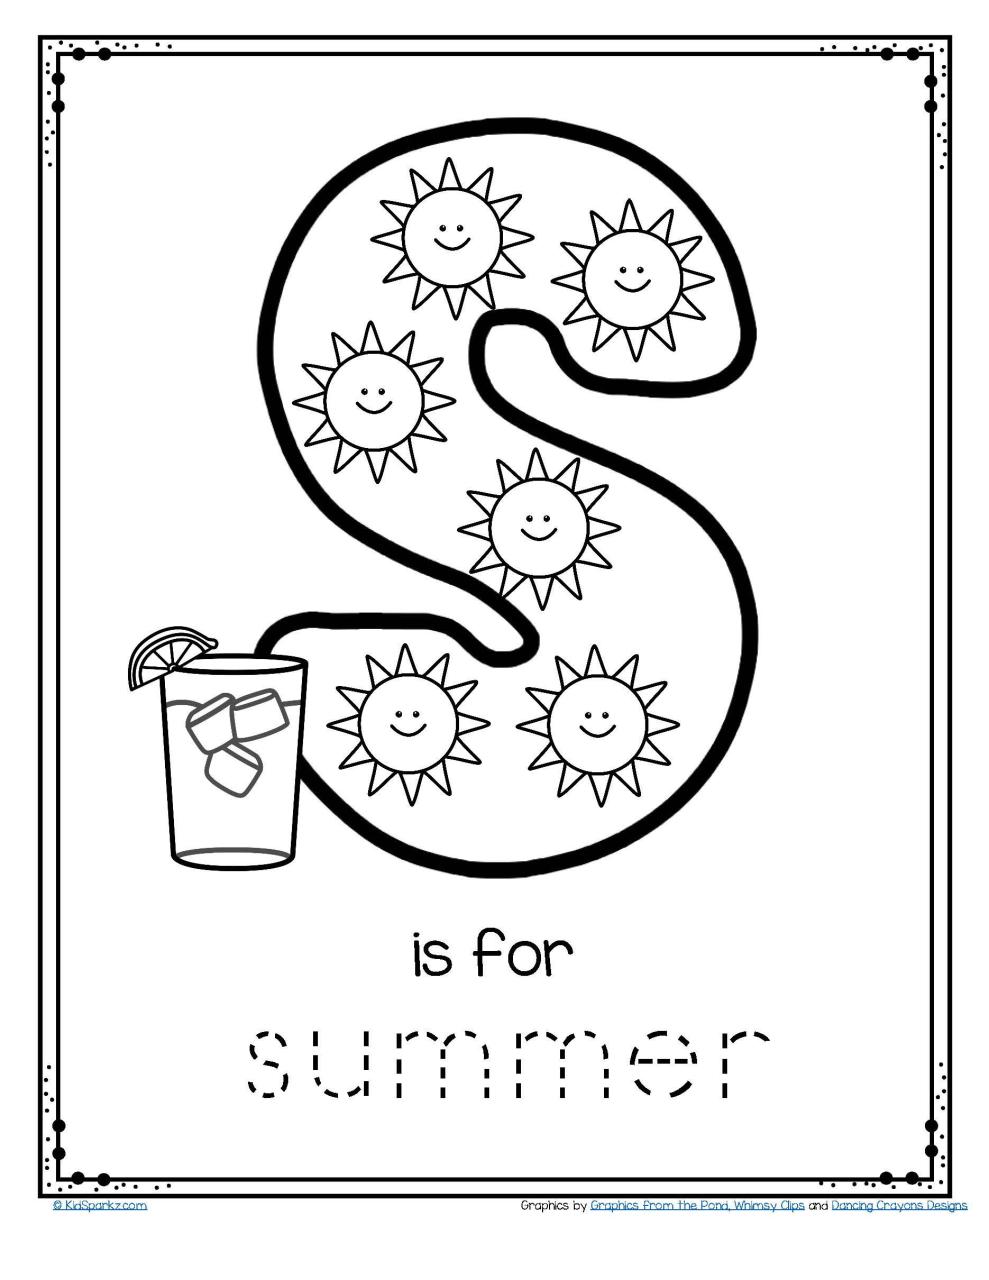 FREE tracing and coloring printable. Sunny days and blue skies bring